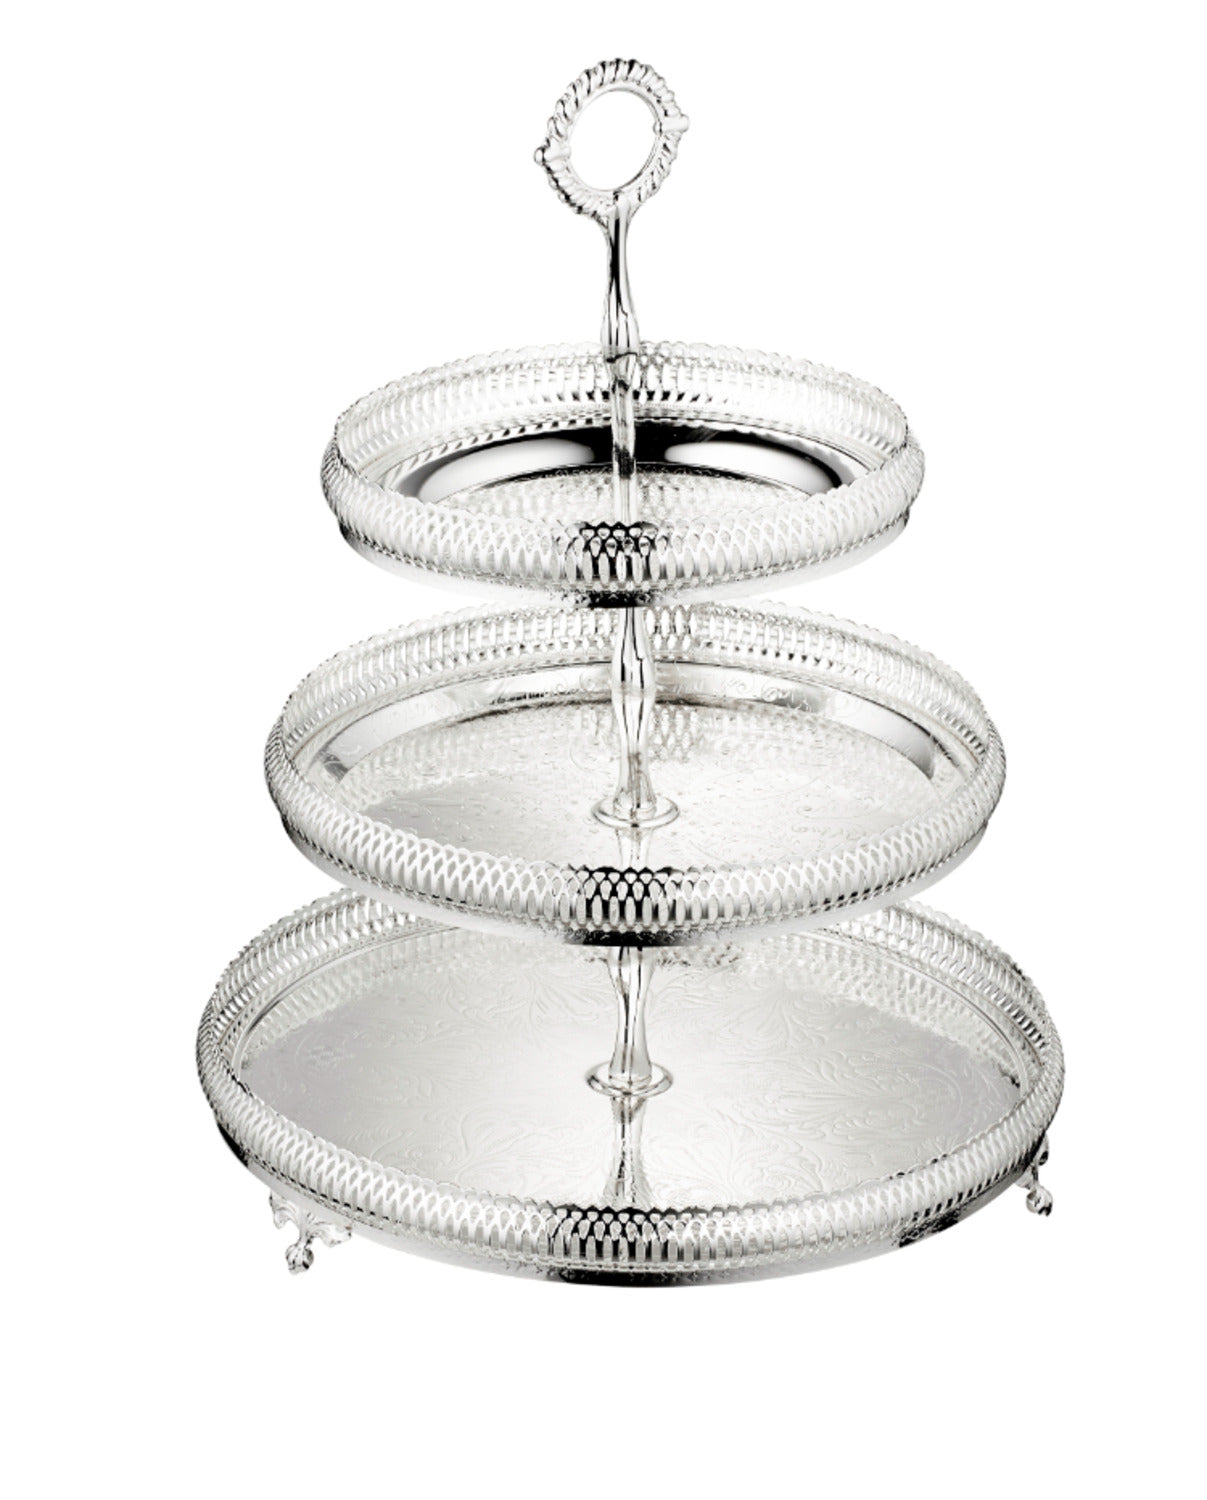 Queen Anne 3 Tier Cake Stand -Top 18, Middle 23 Dia, Bottom 28 Dia cm -Silver Plated